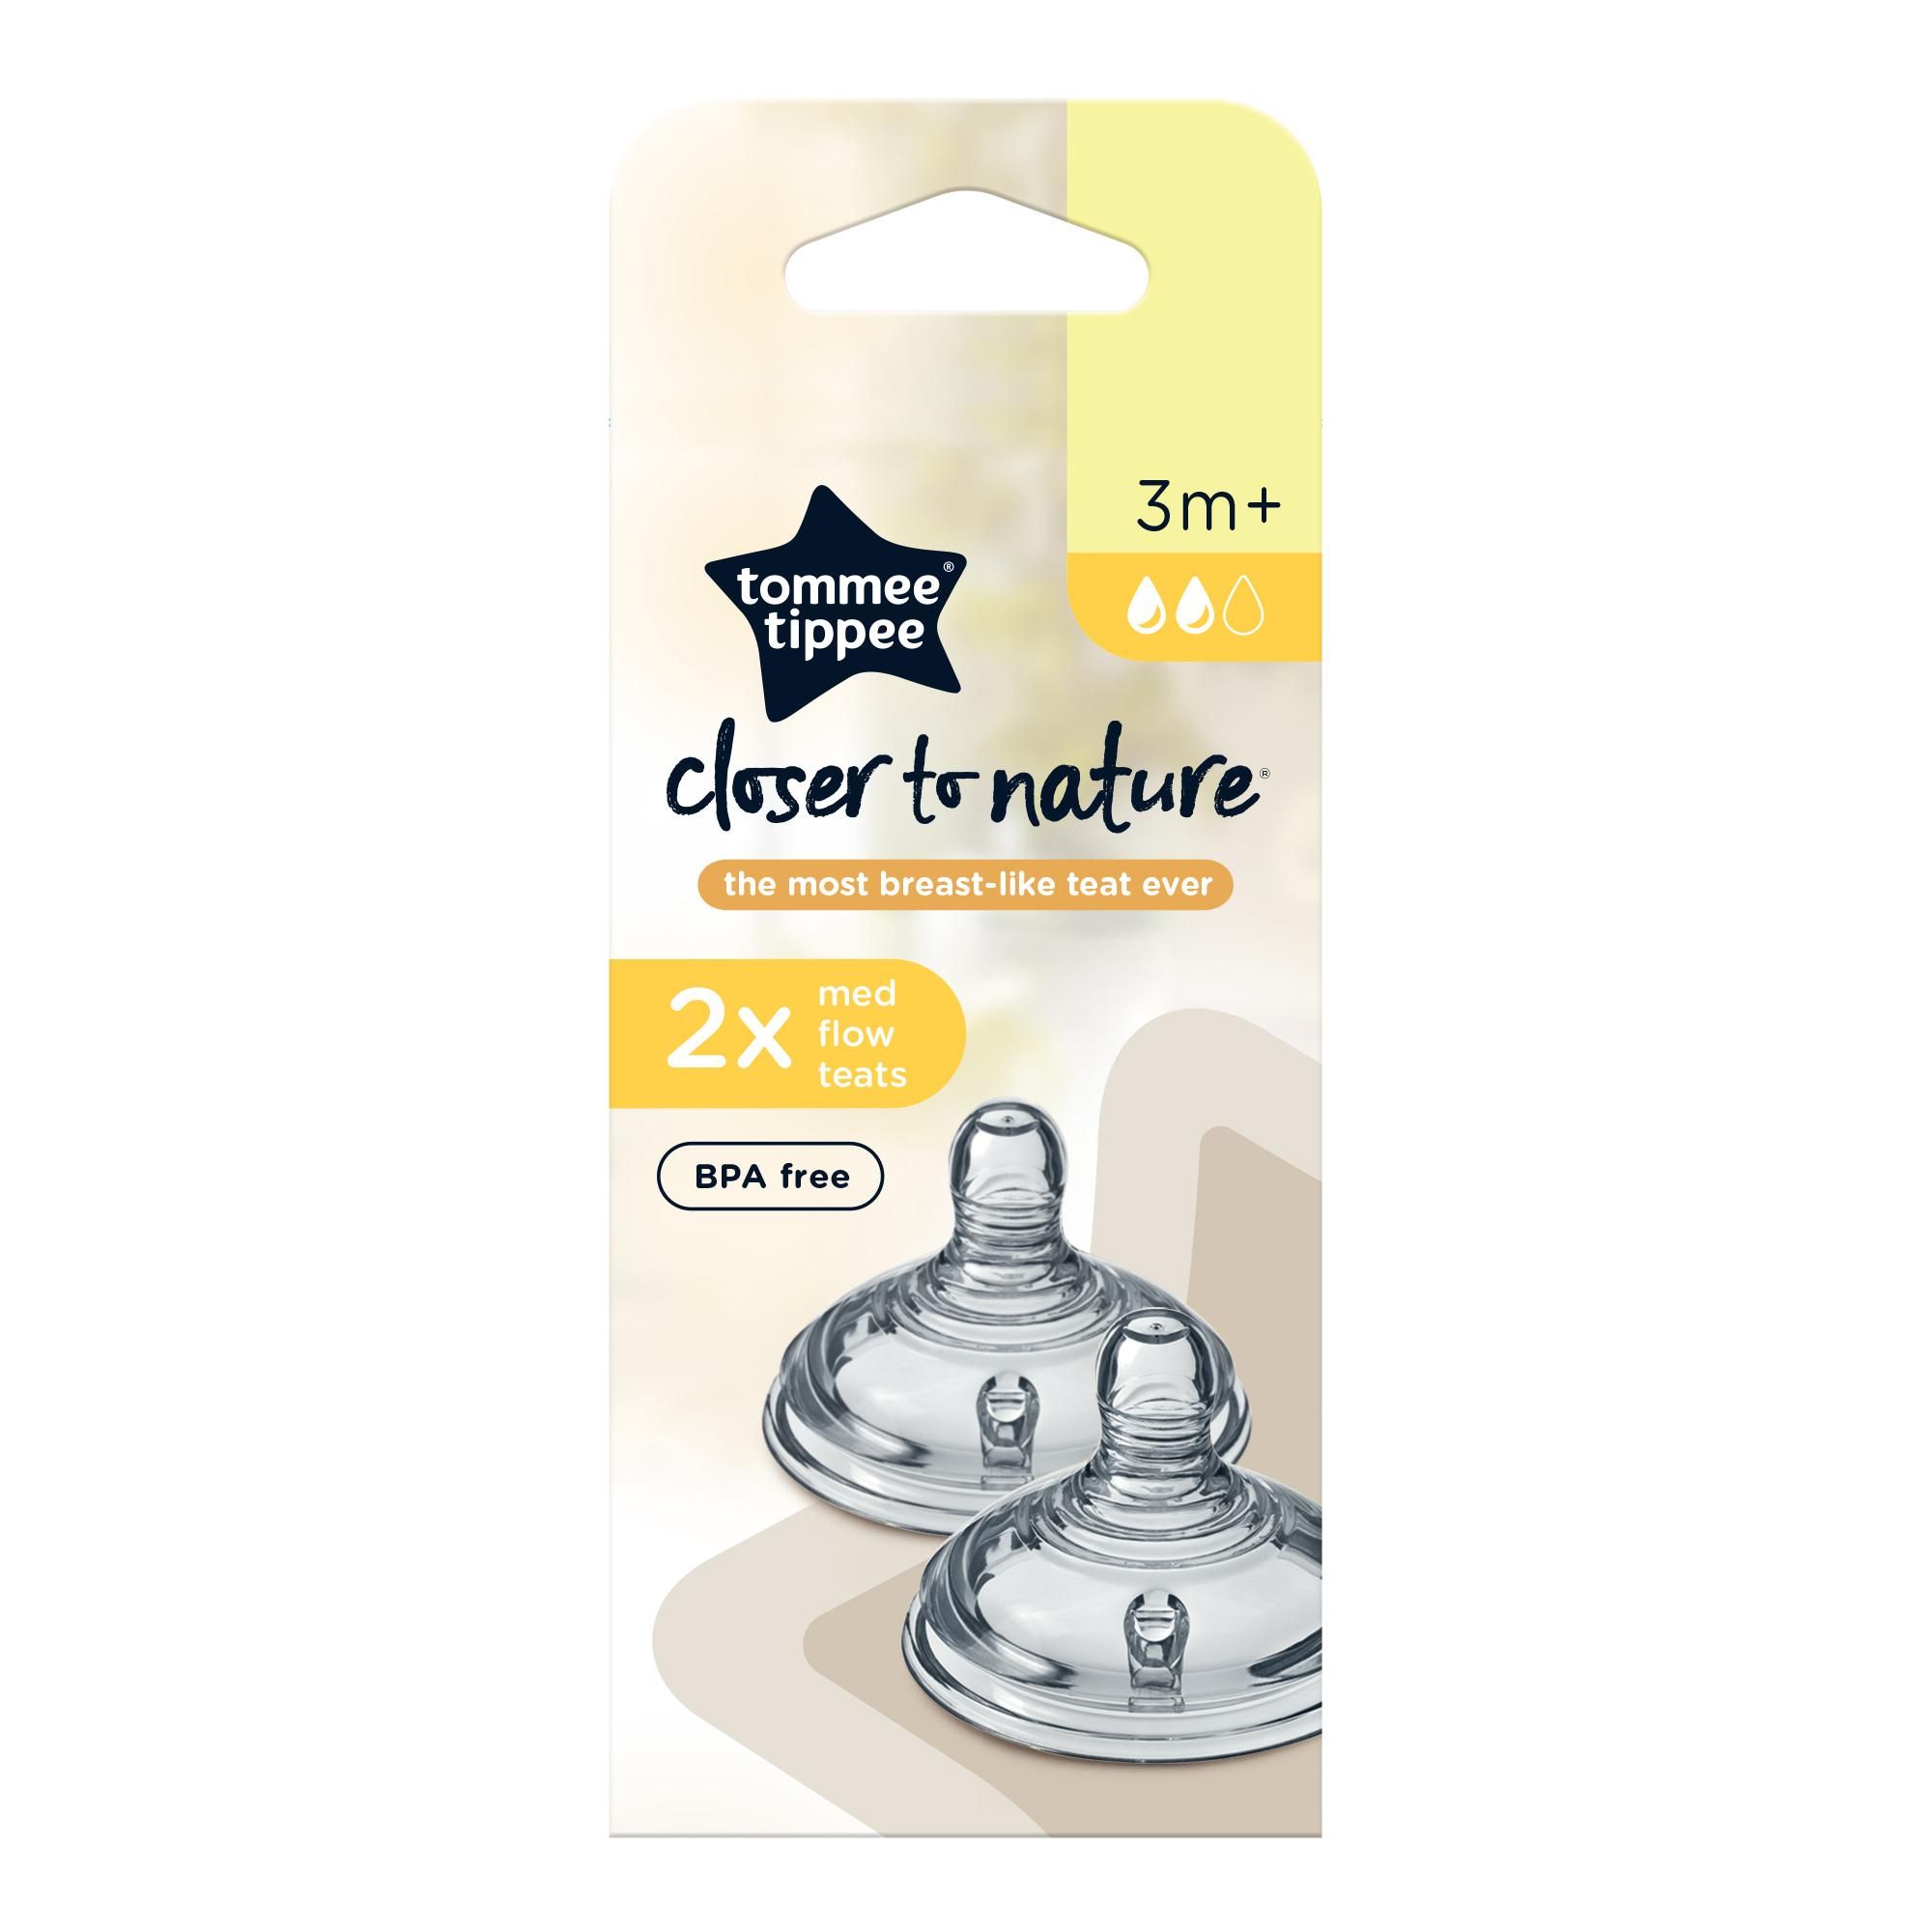  Tommee Tippee Closer To Nature Kit Newborn Ctn One